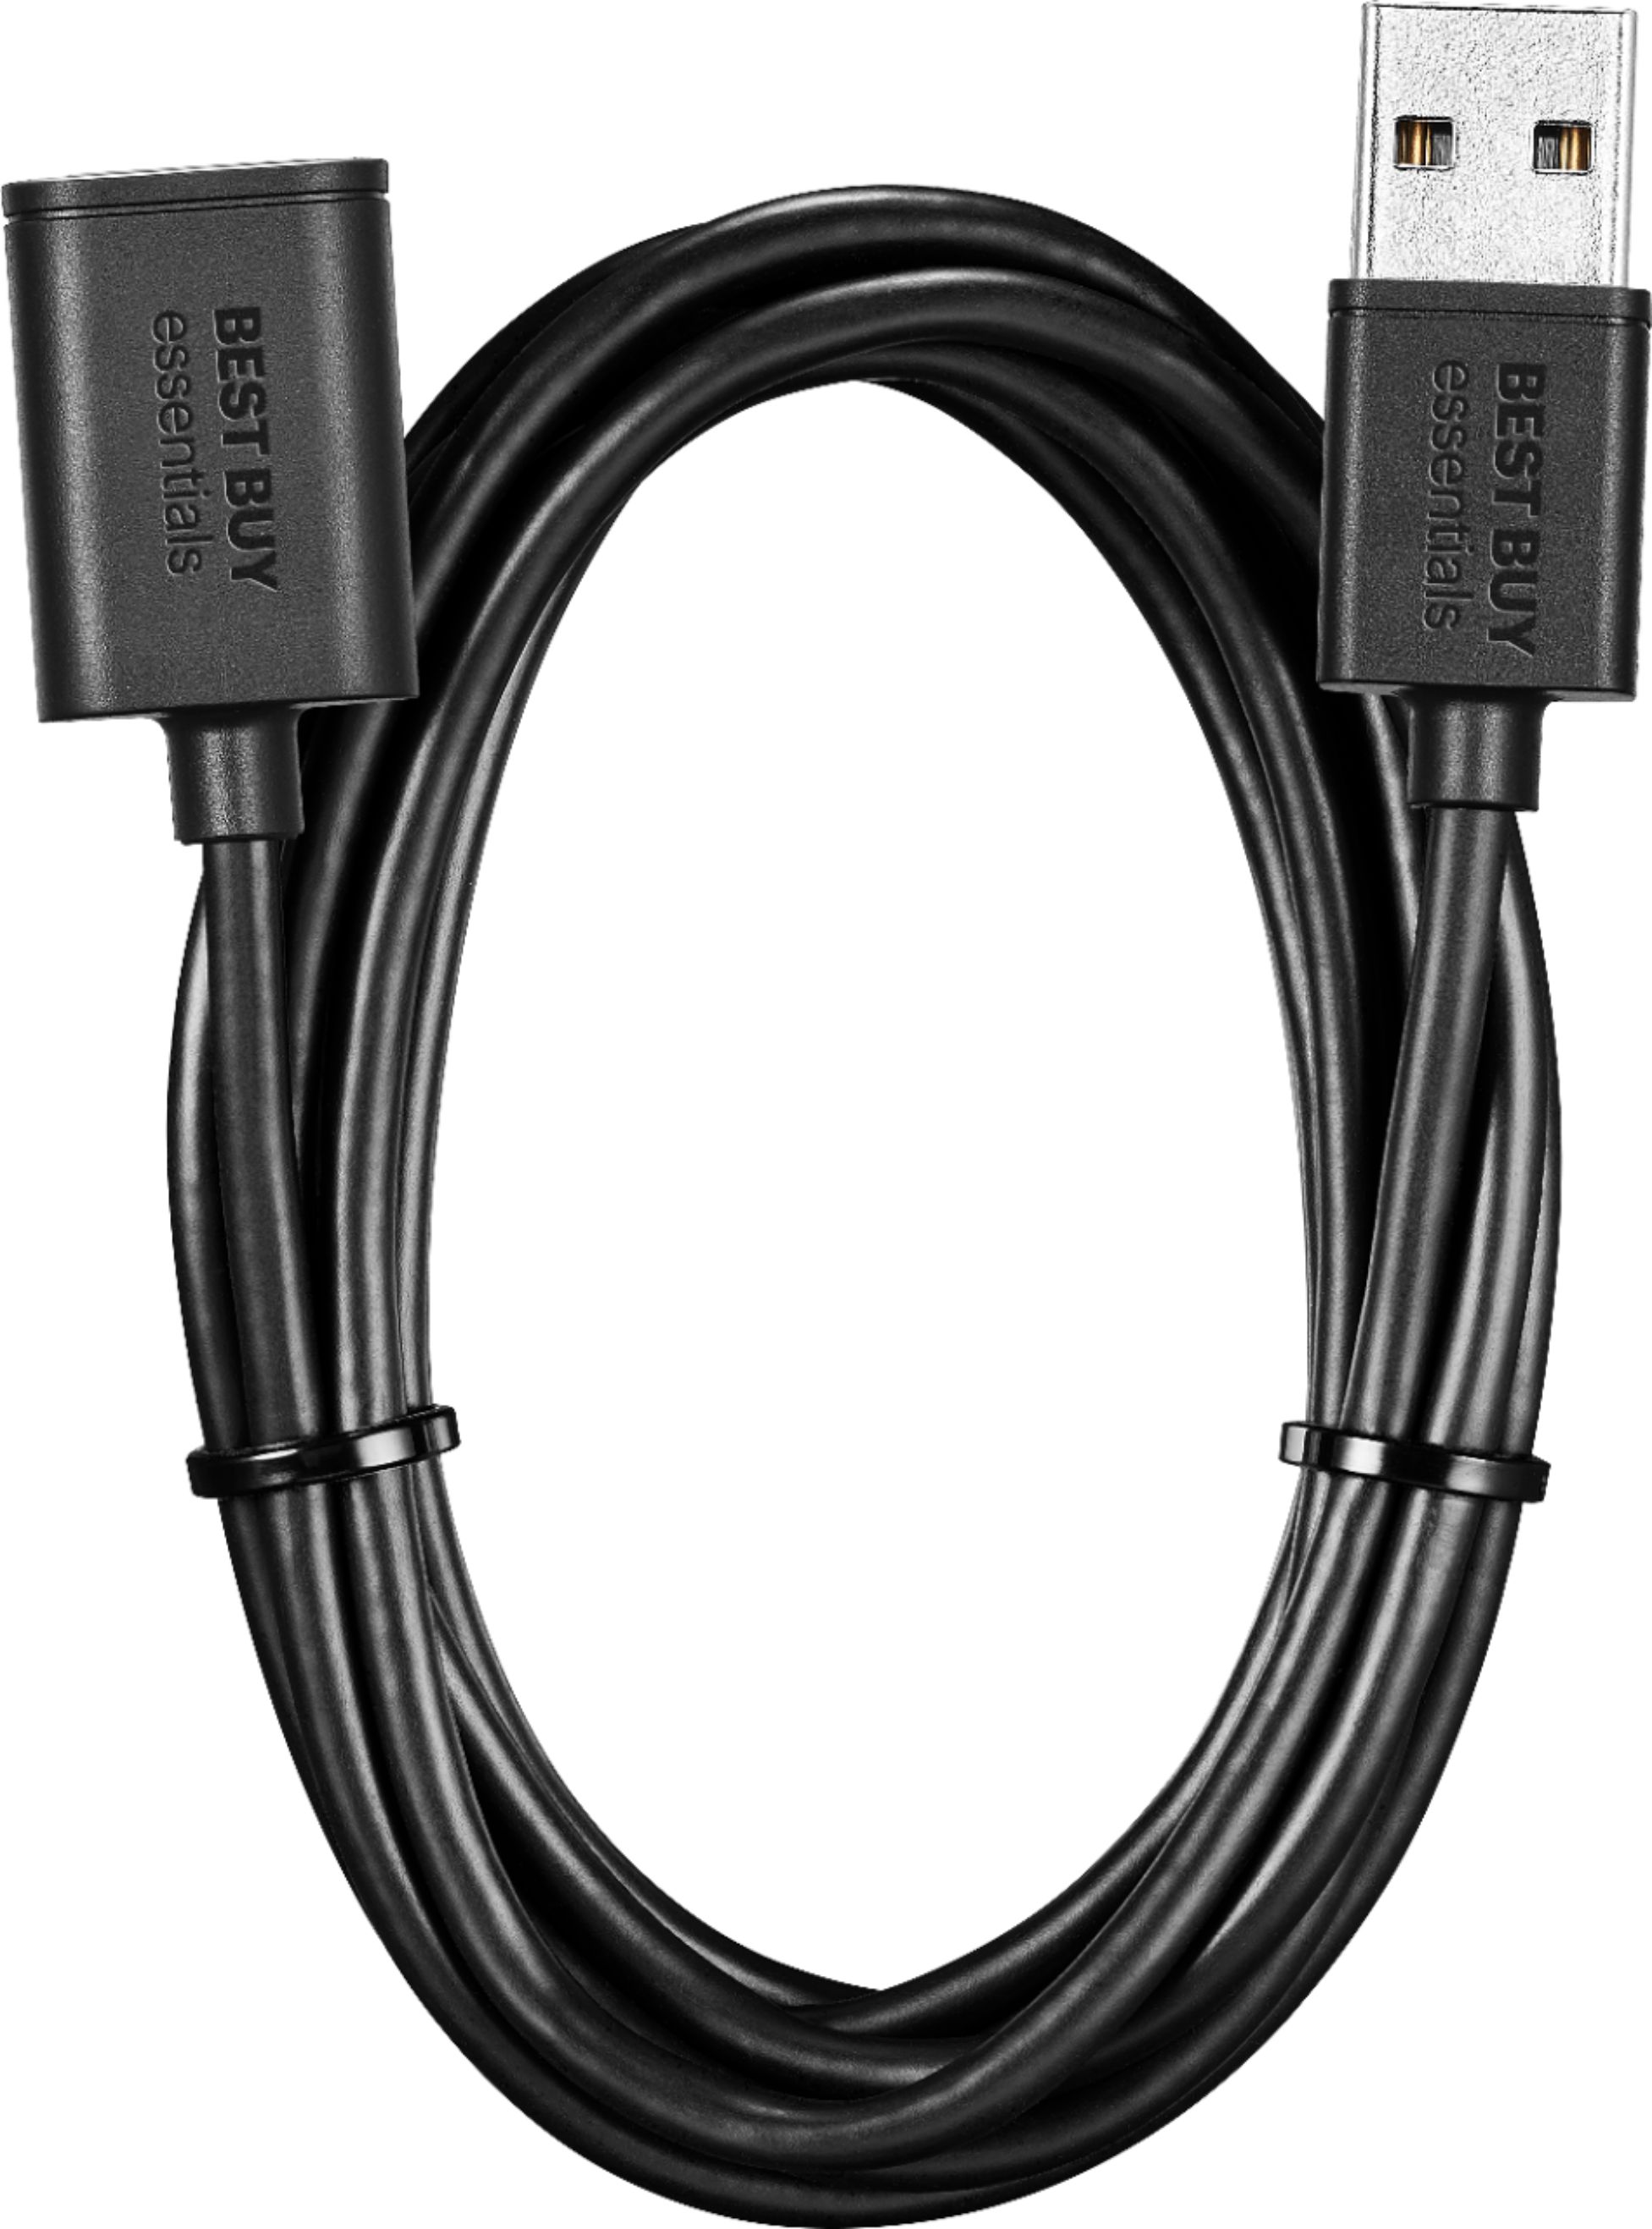 GE 6ft USB Extension Cable, Works with All Brands of USB-Enabled Devices,  Limited Lifetime Warranty, Black, 34505